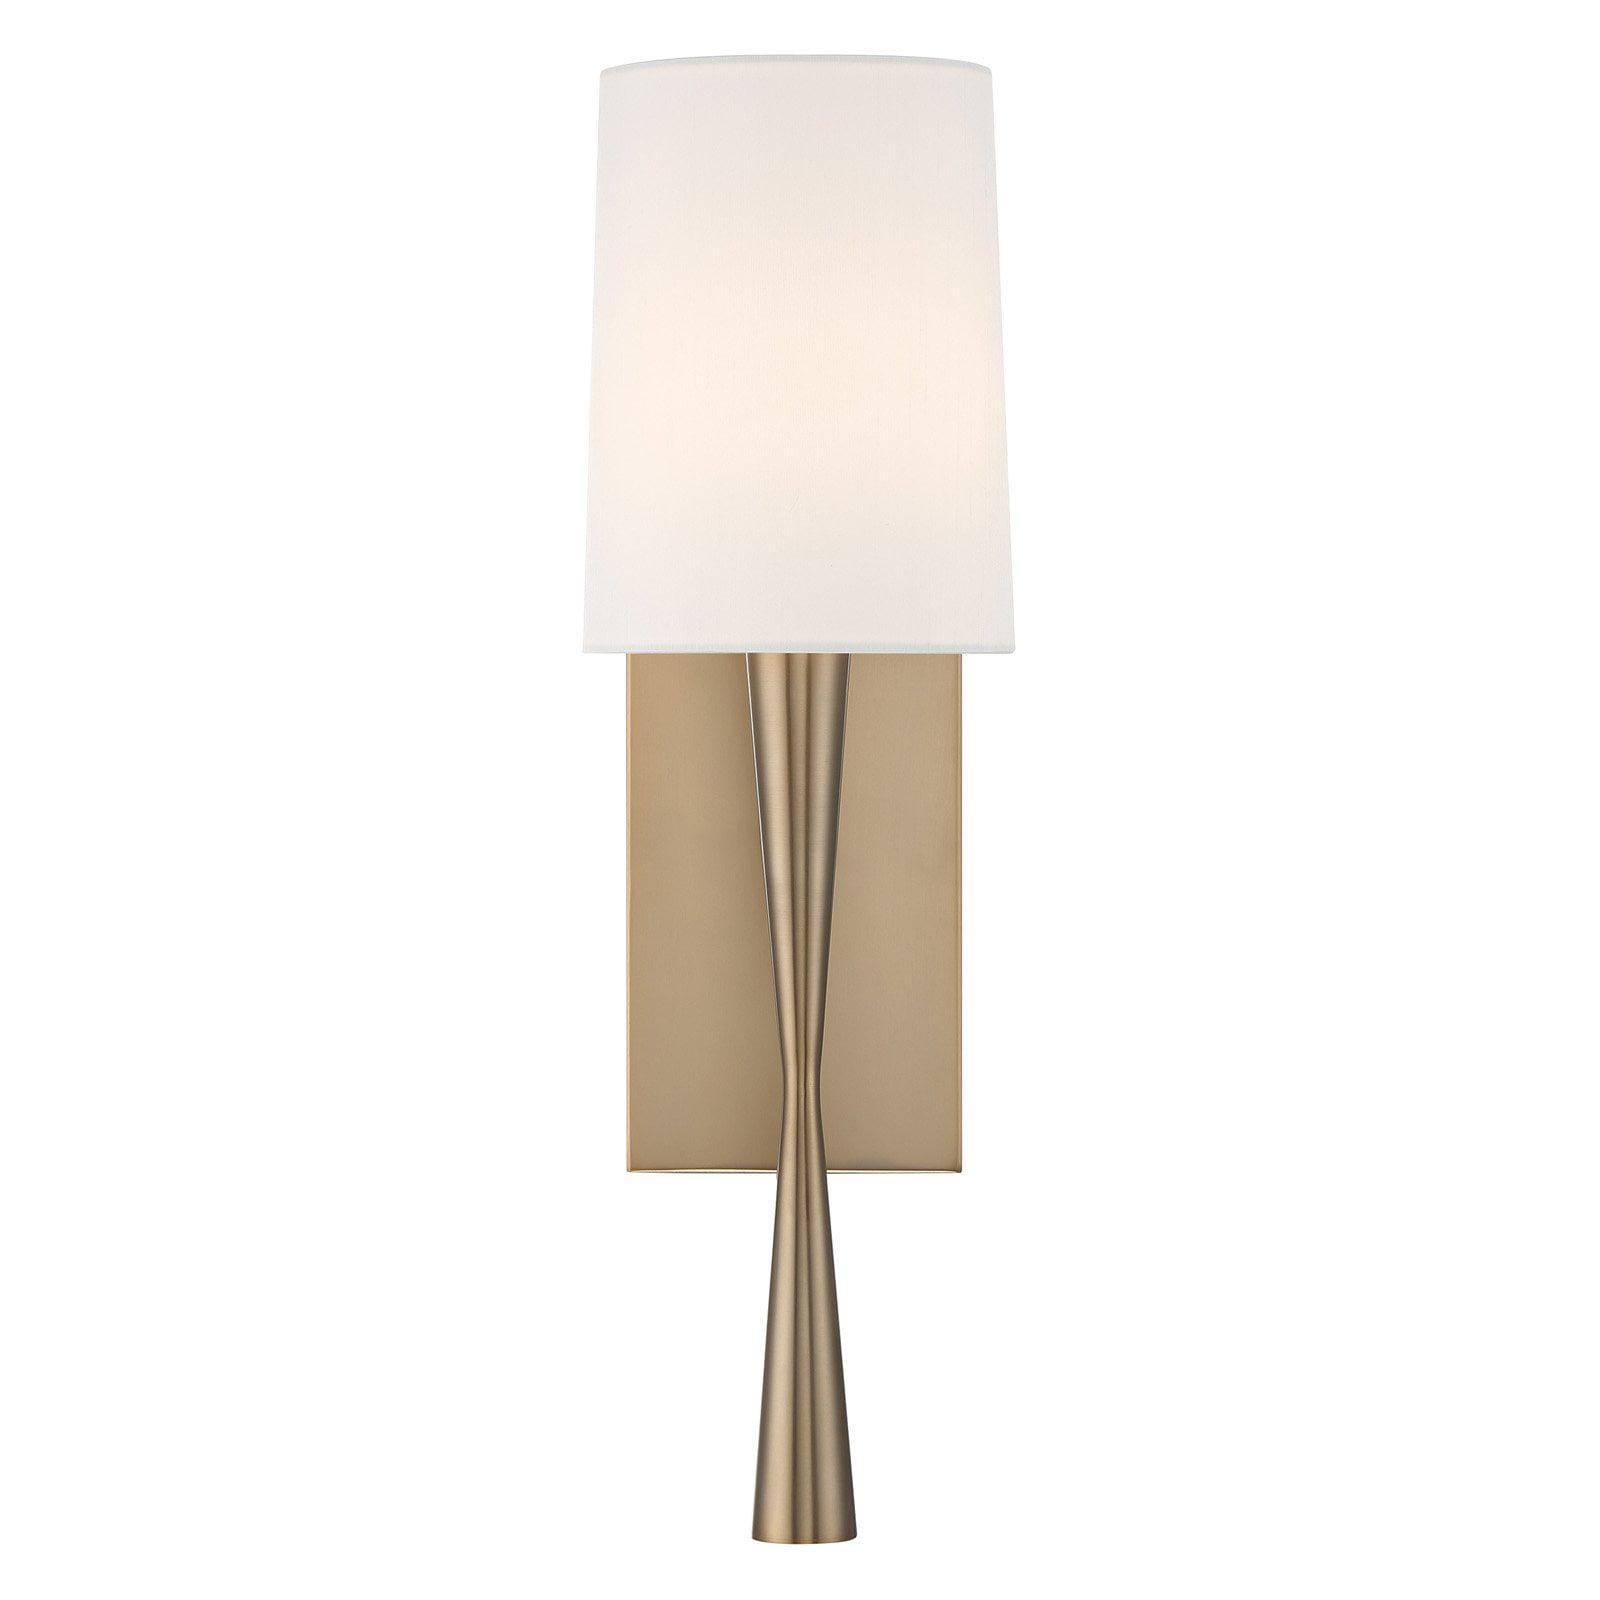 Trenton Aged Brass Cylinder Direct Wired Sconce with White Silk Shade